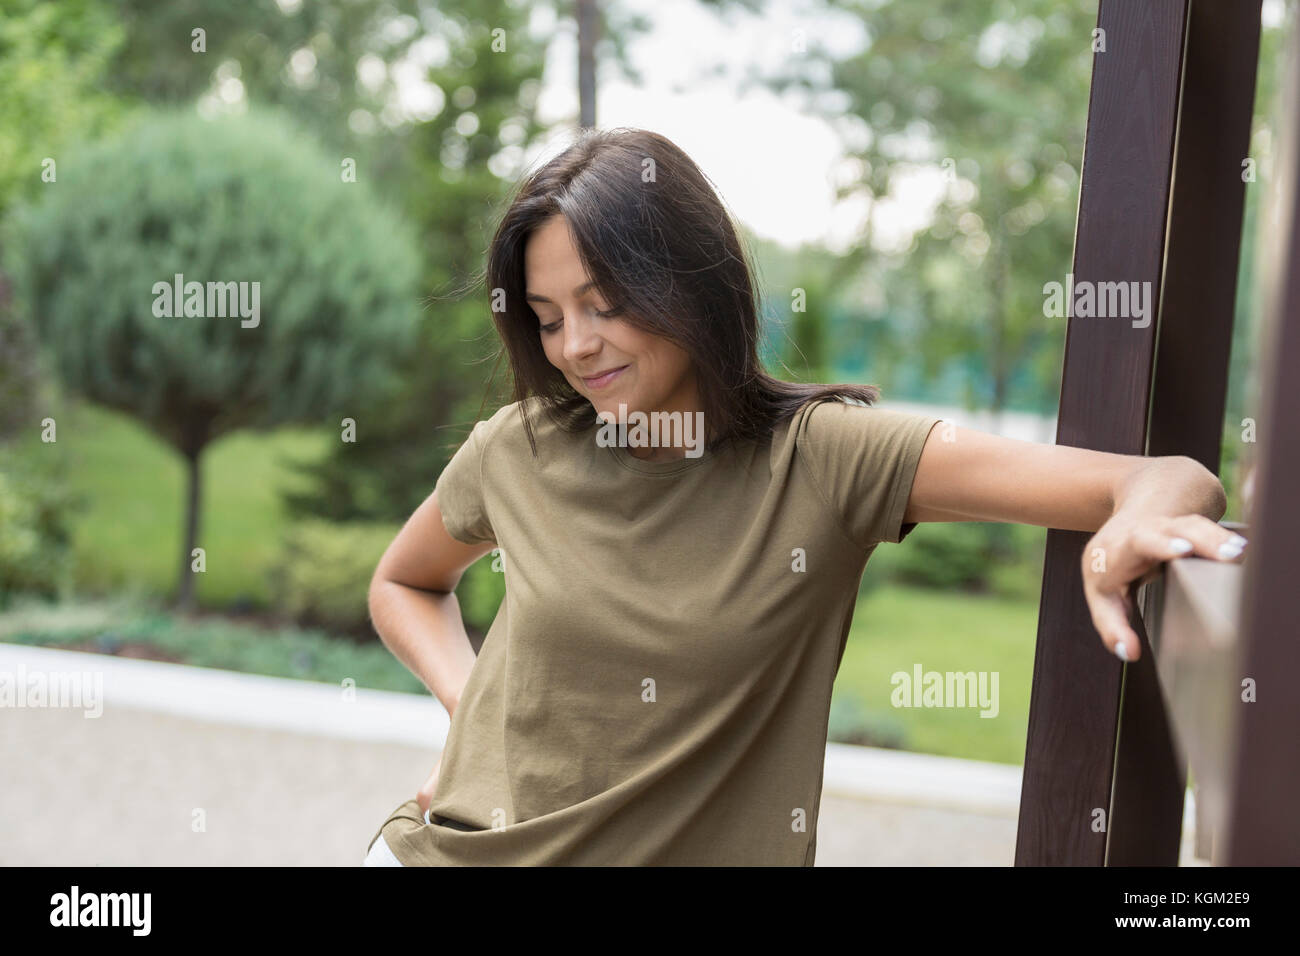 Smiling woman looking down while standing by railing Banque D'Images